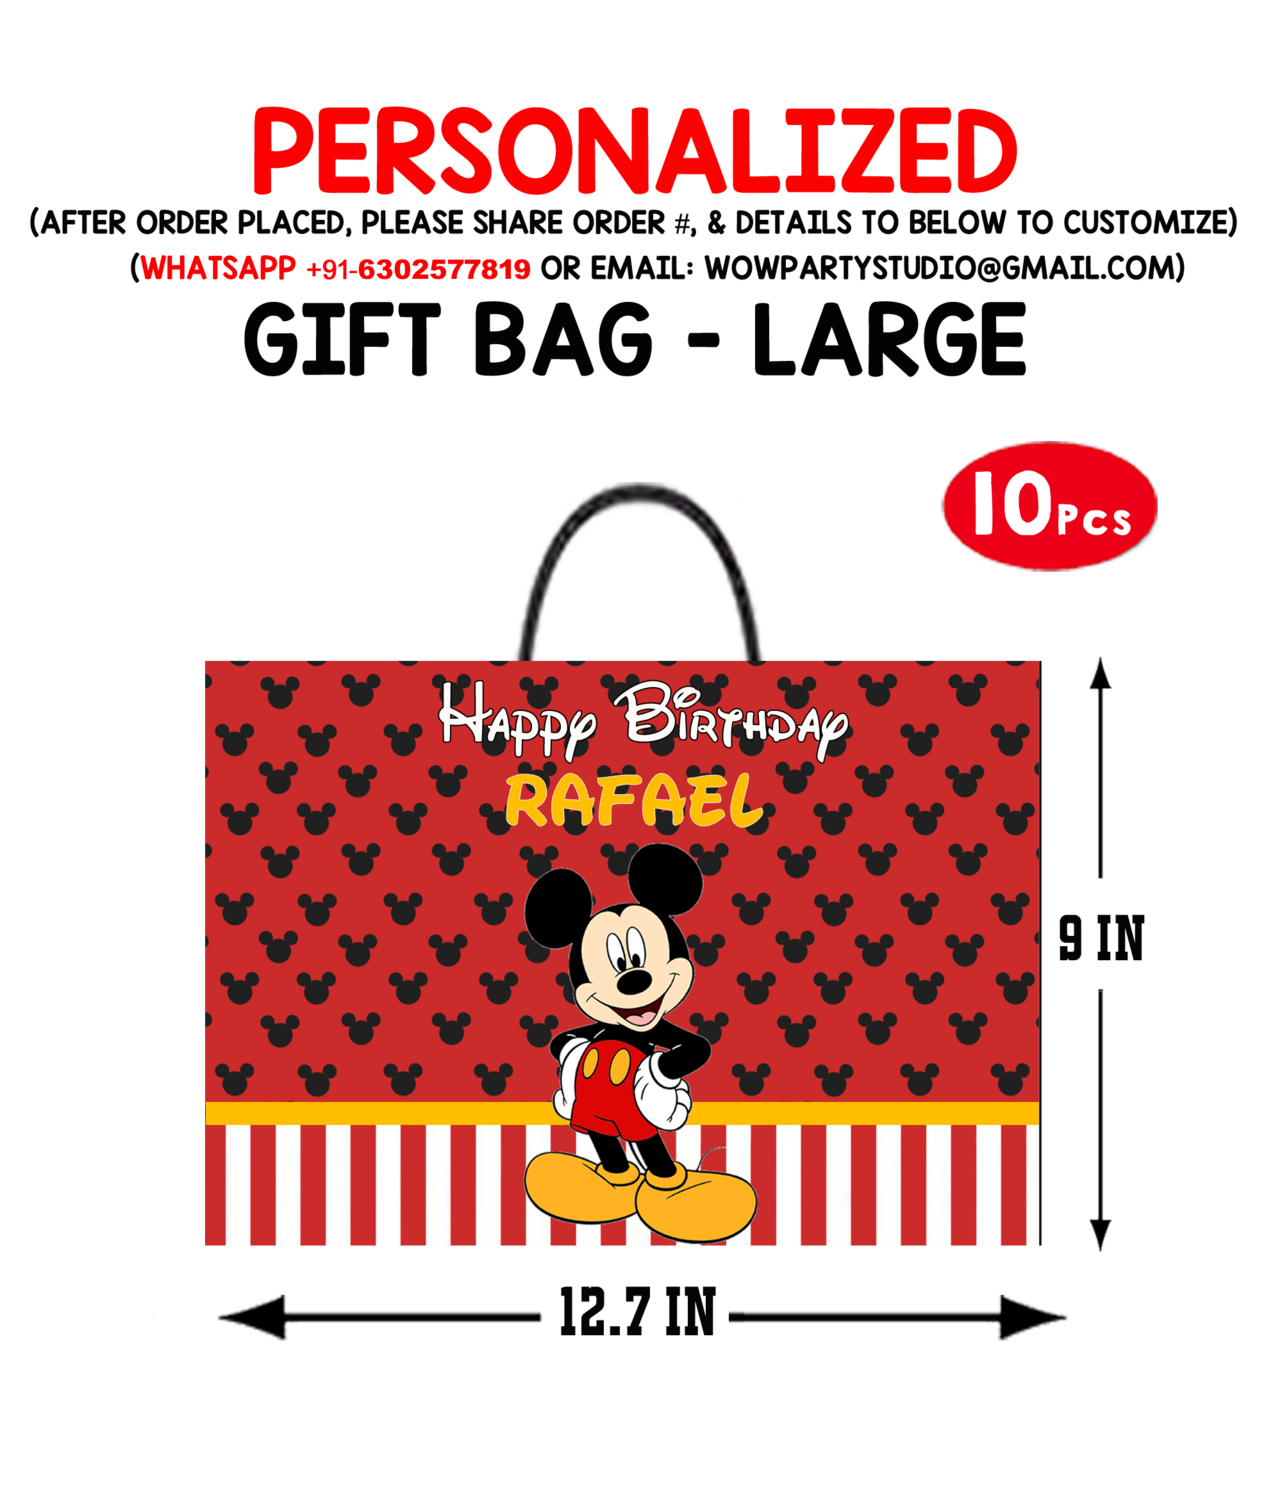 Mickey Mouse Gift Bag - Large (10 Pcs)